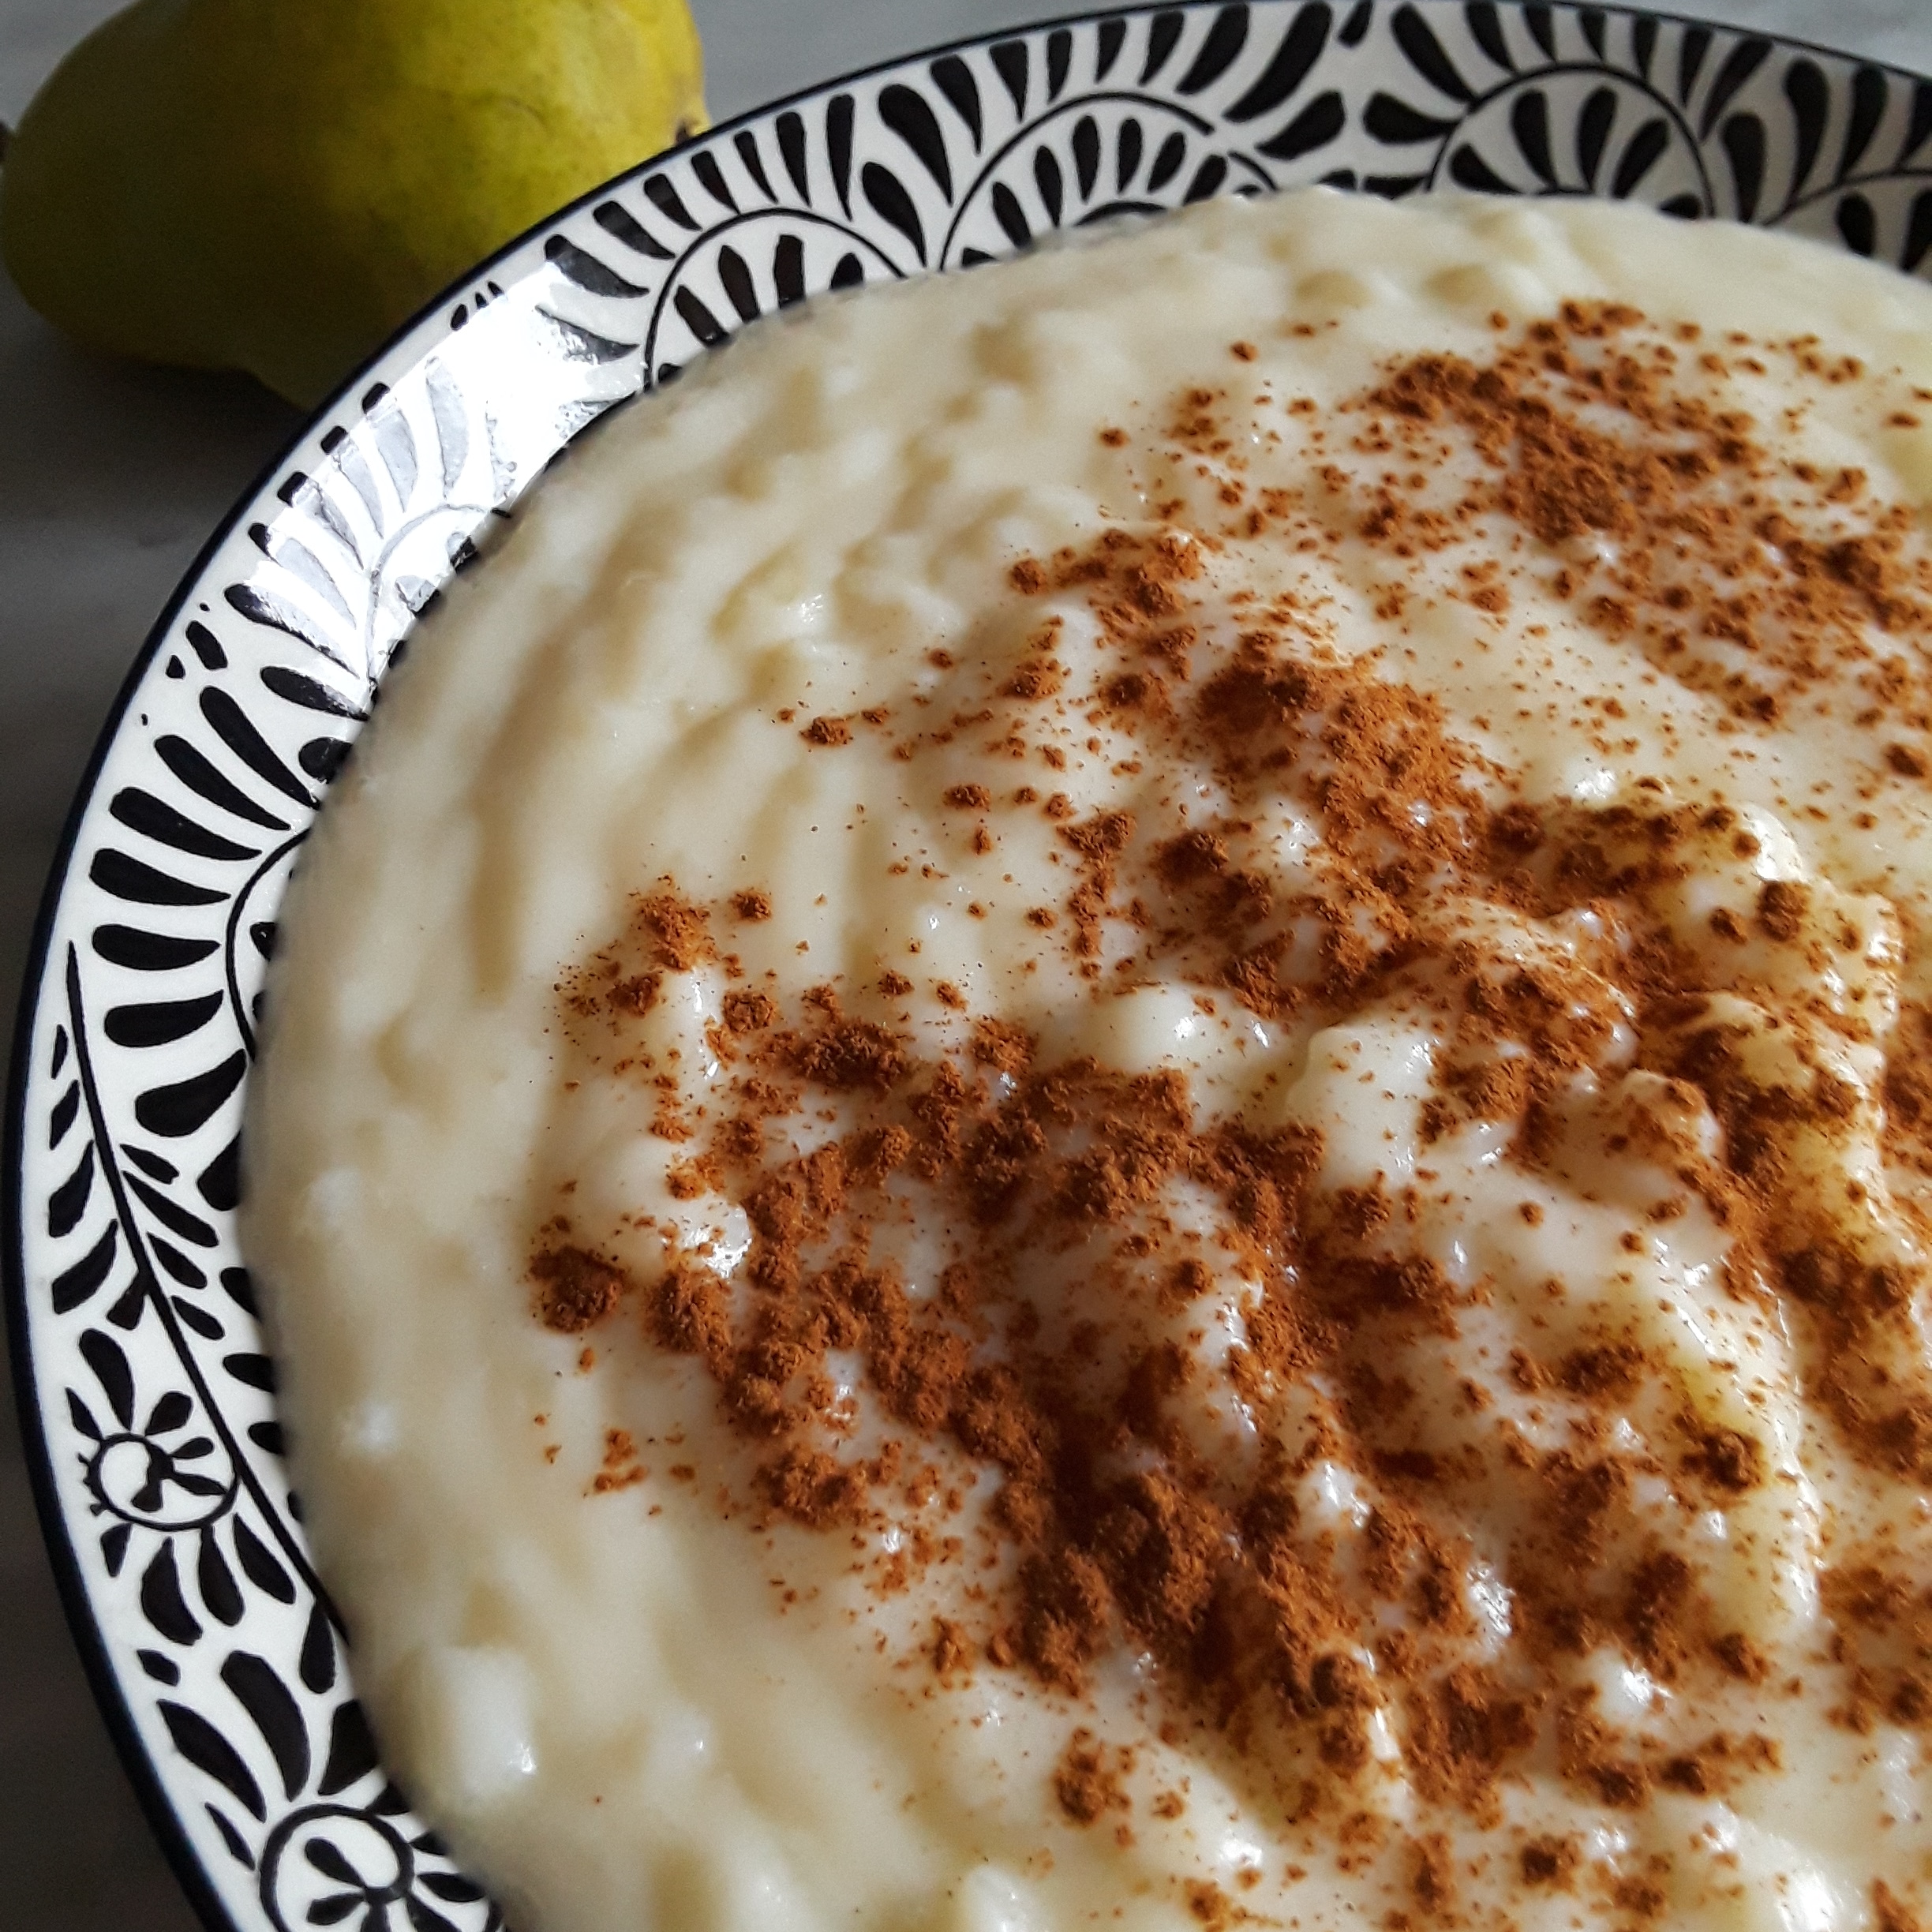 rice pudding in a large serving bowl is sprinkled with cinnamon